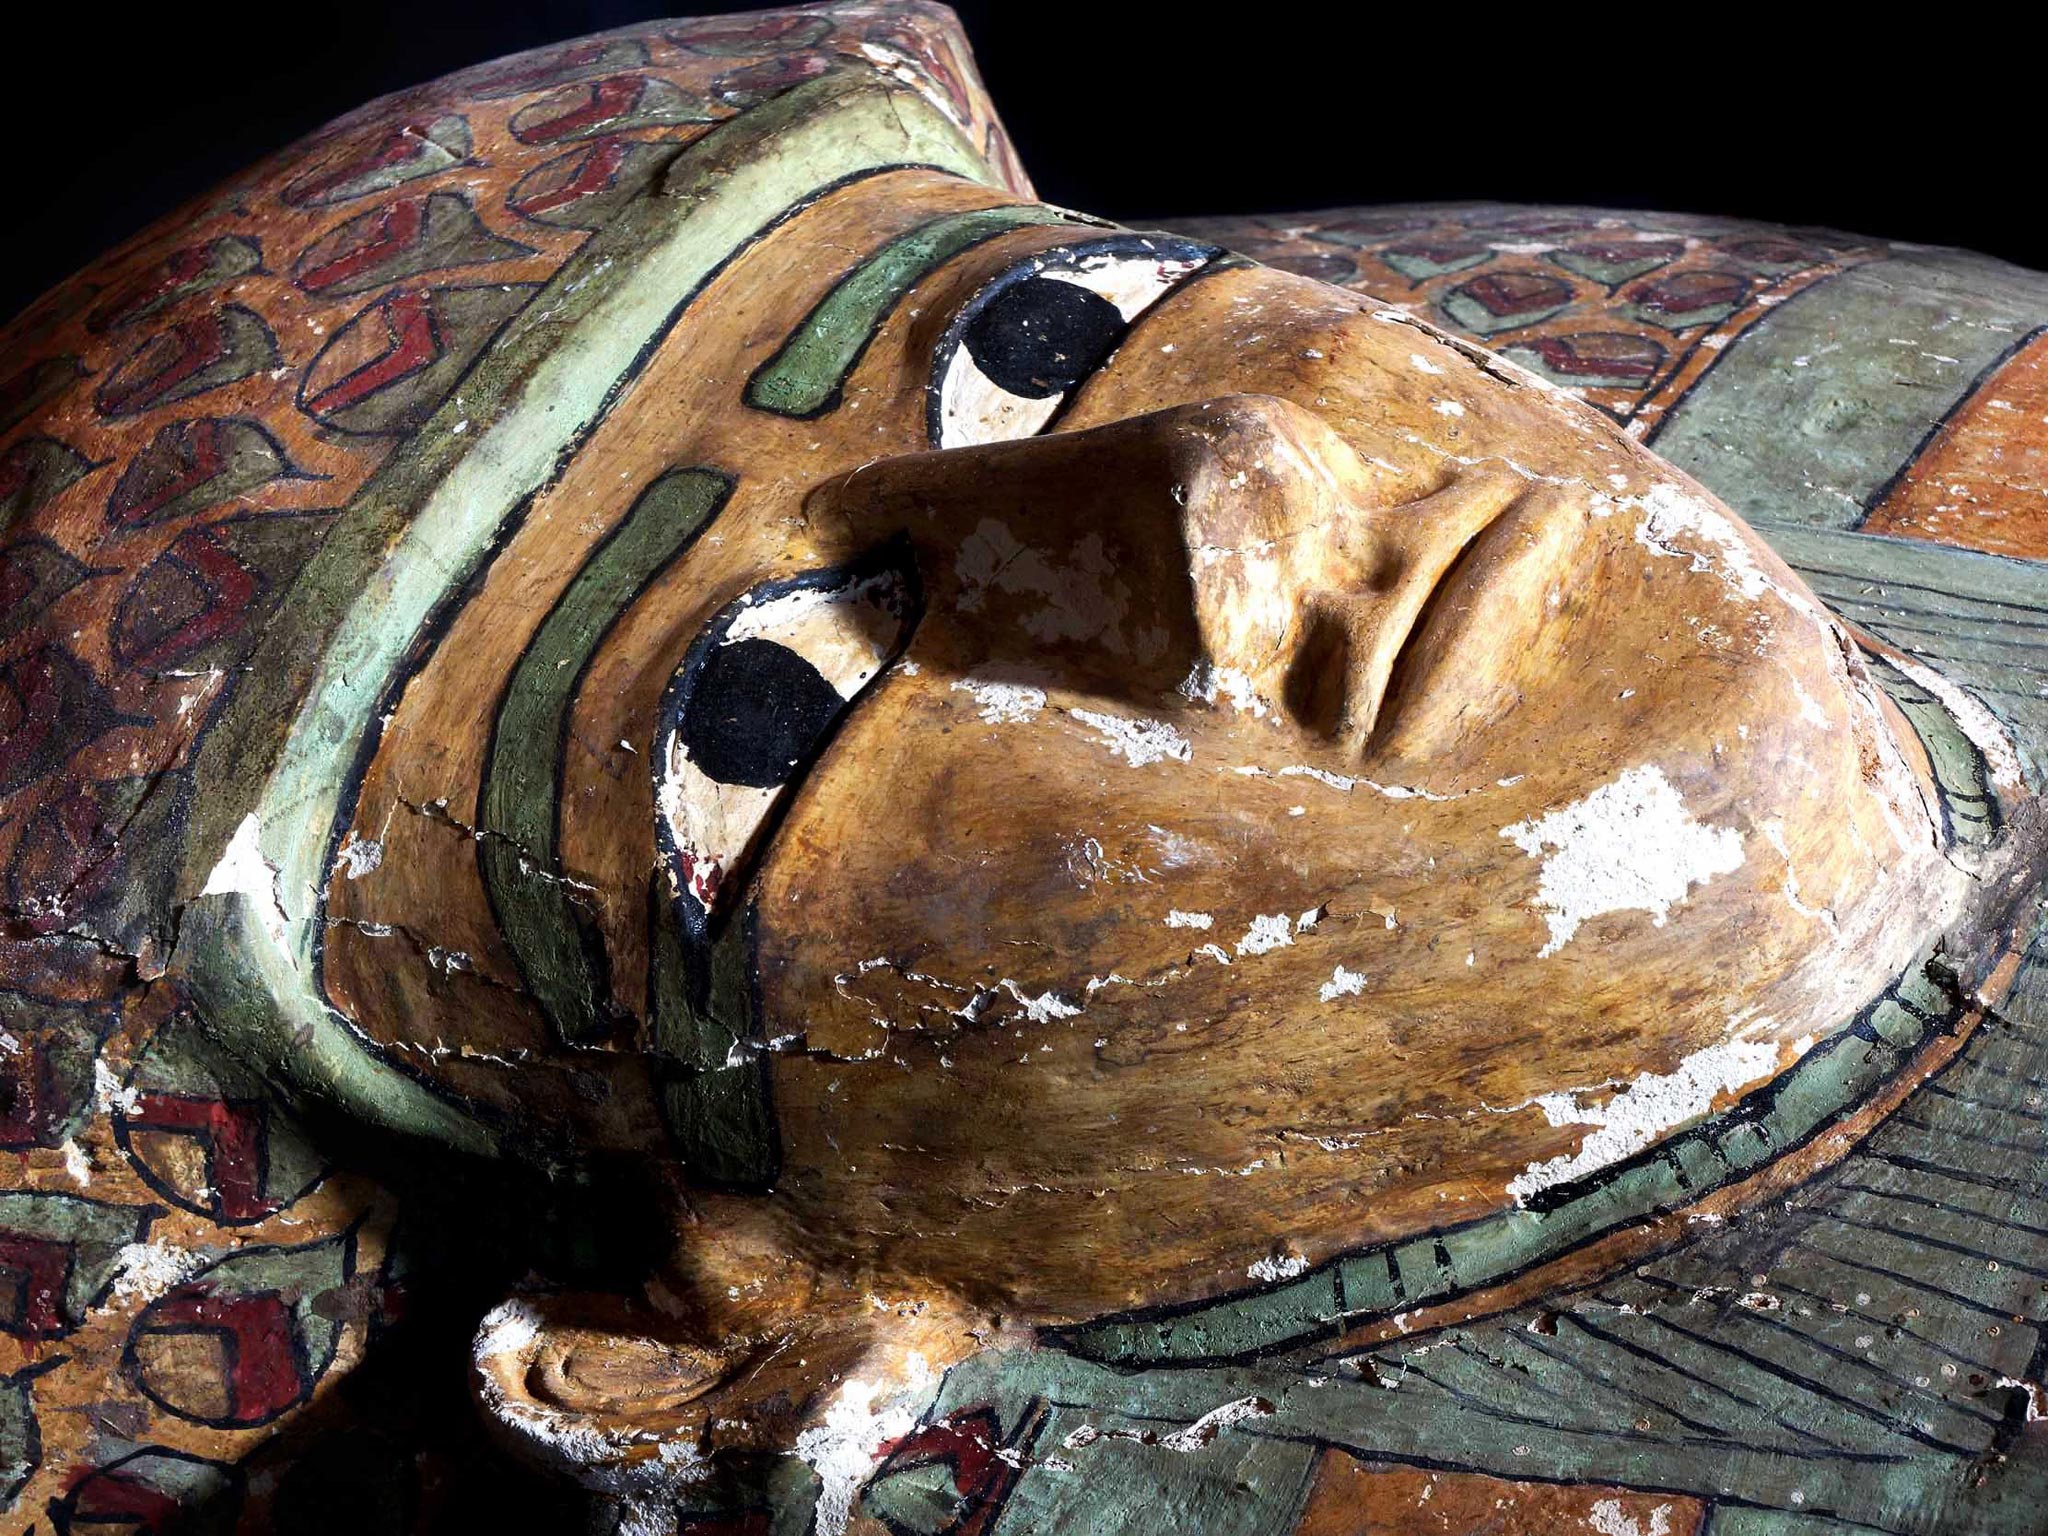 The mummy's preserved wooden sarcophagus after being cleaned up